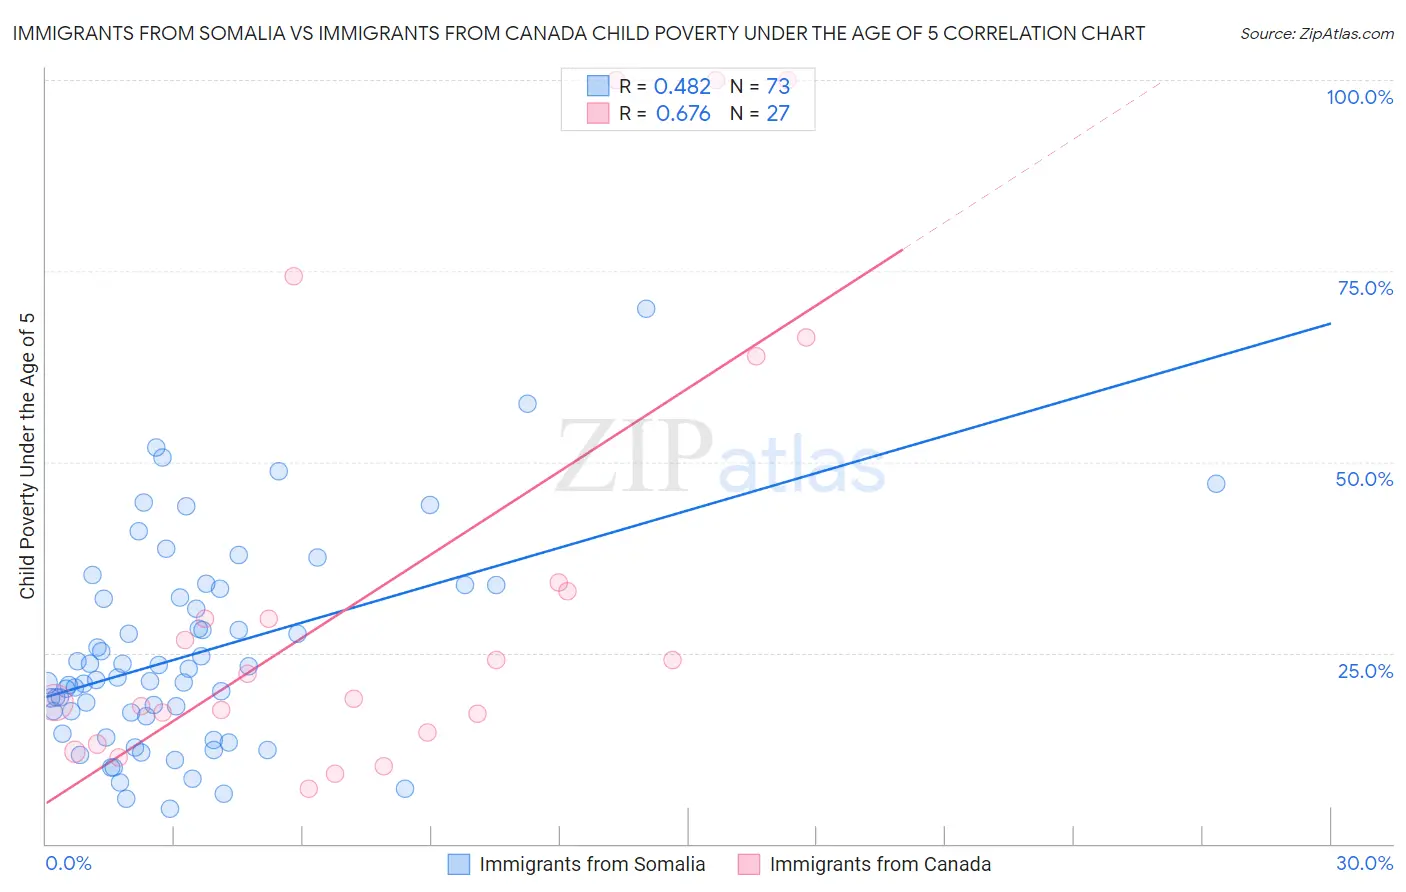 Immigrants from Somalia vs Immigrants from Canada Child Poverty Under the Age of 5